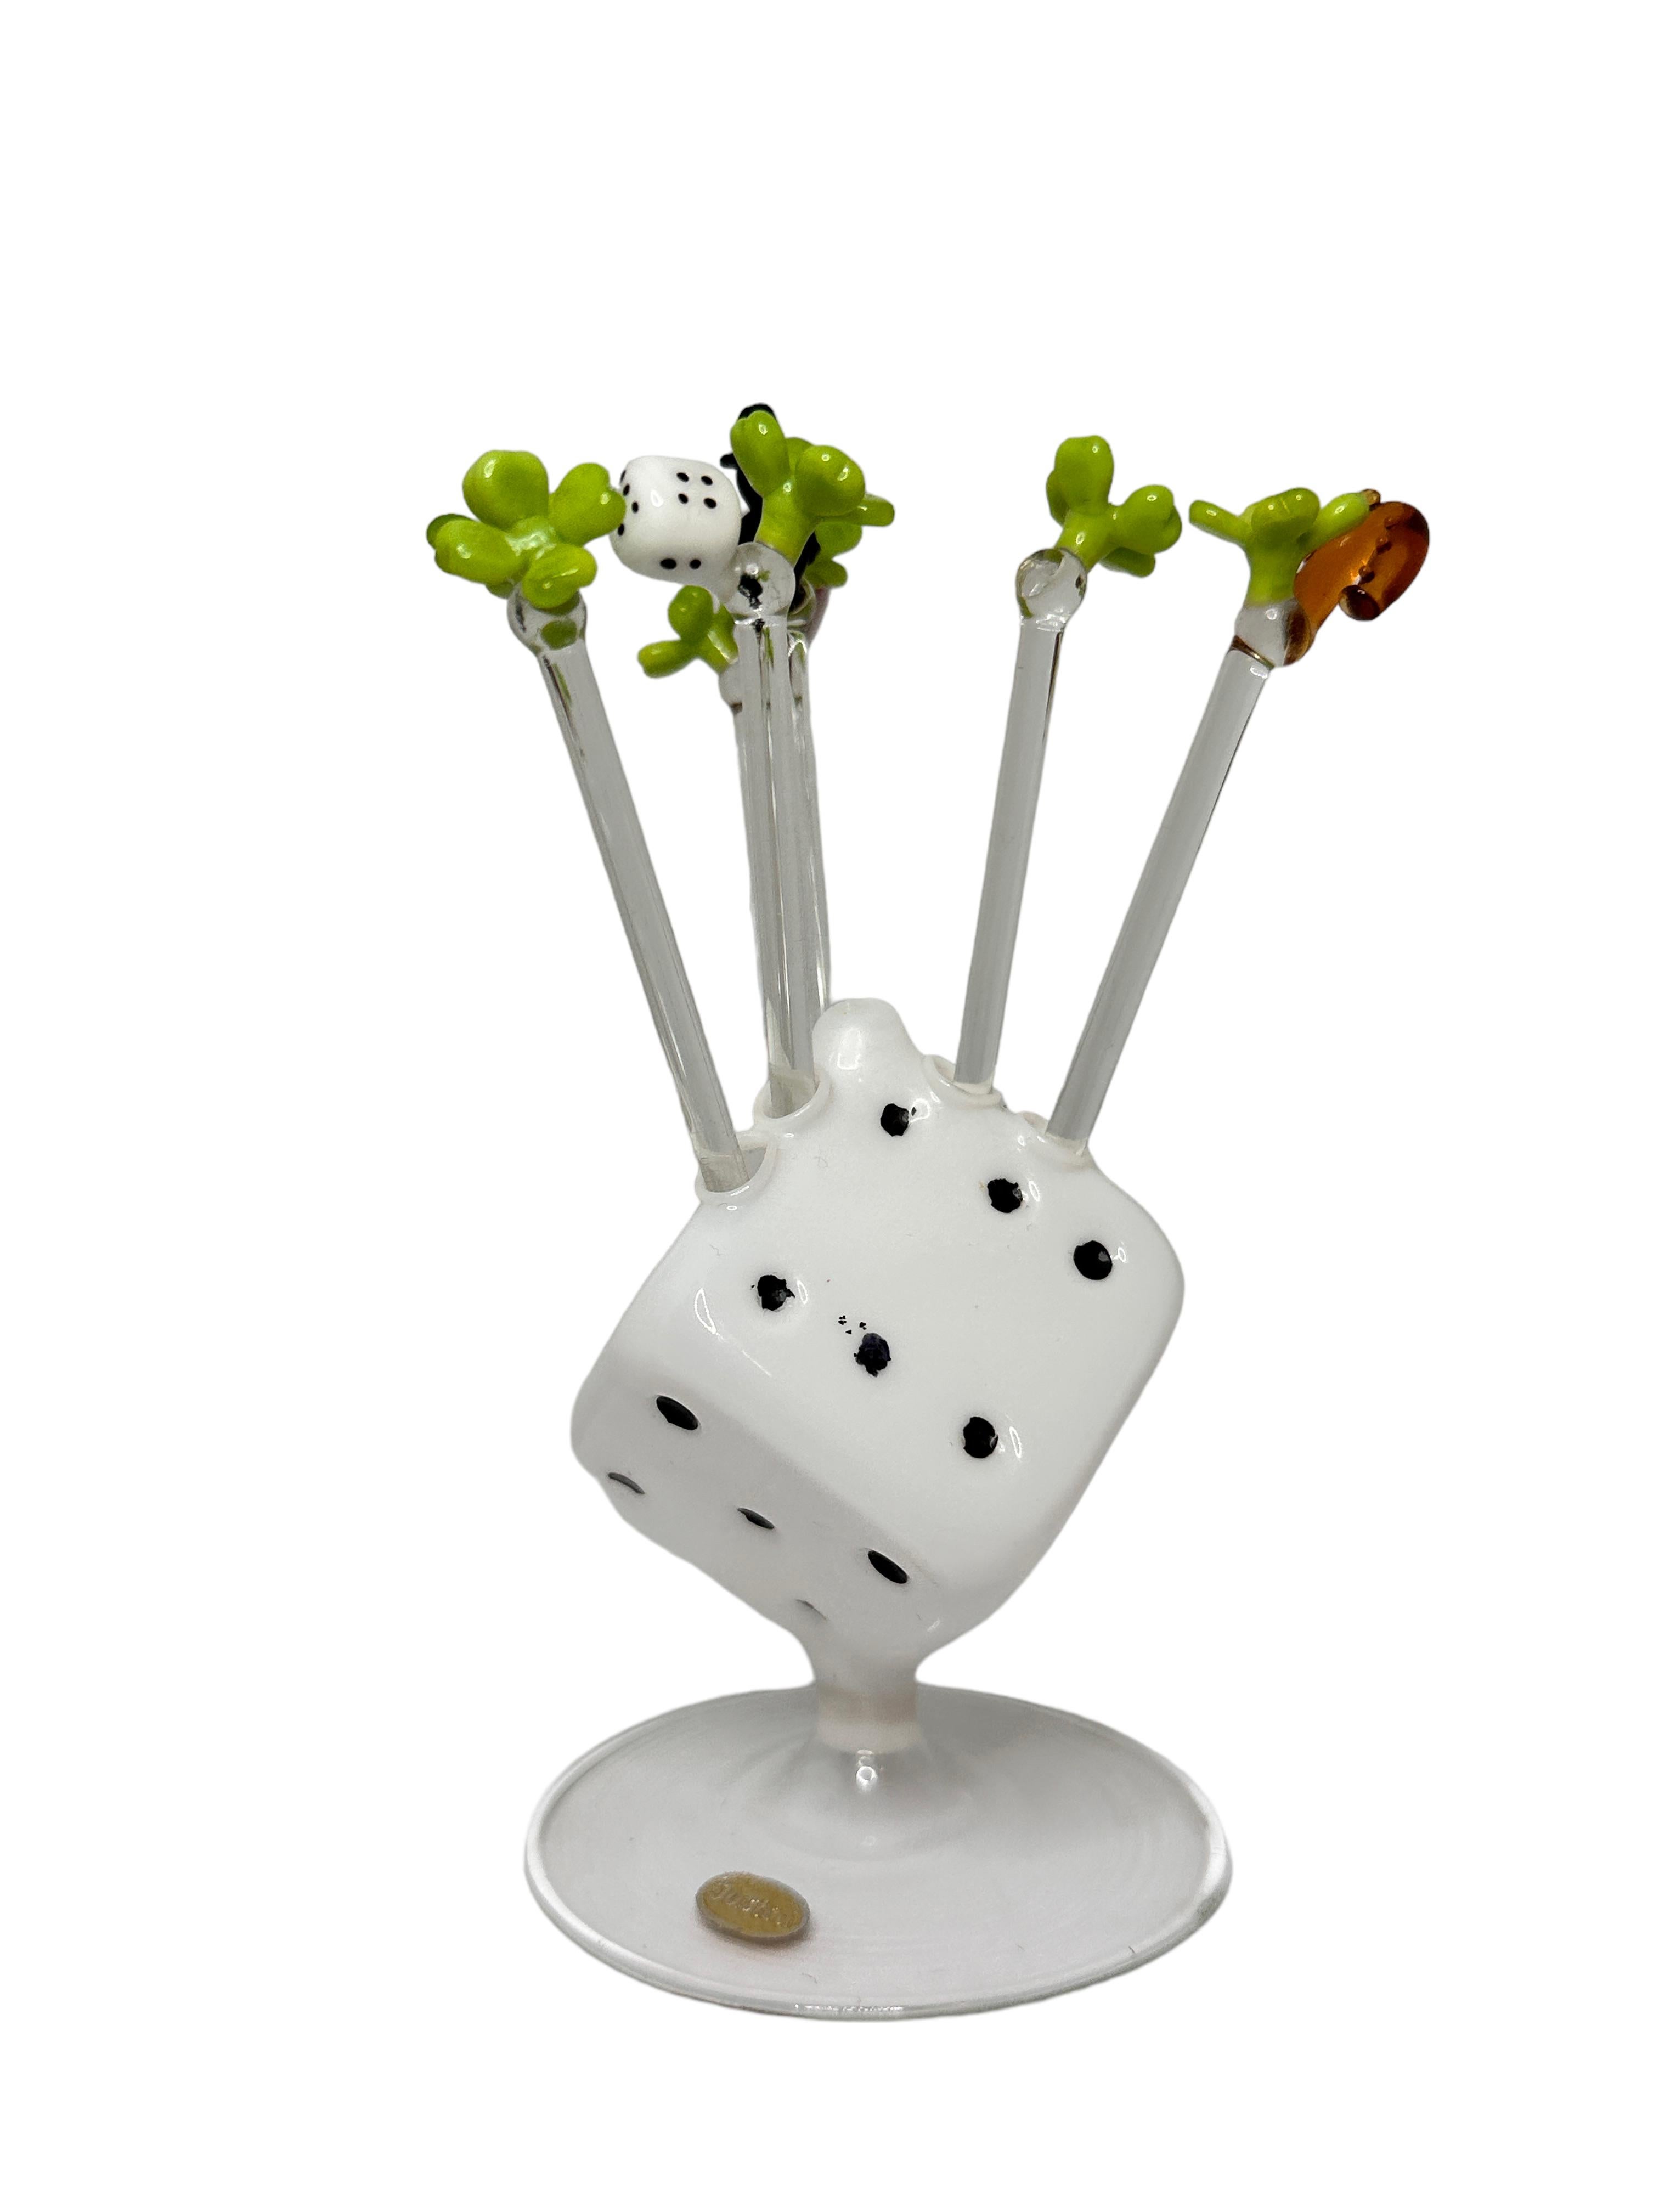 Classic early 1960s Austrian cocktail picks made of glass, showing Lucky Charms in a mouth blown glass dice stand. The total high is approx. 5 inches. The Dice Stand itself is approx. 3